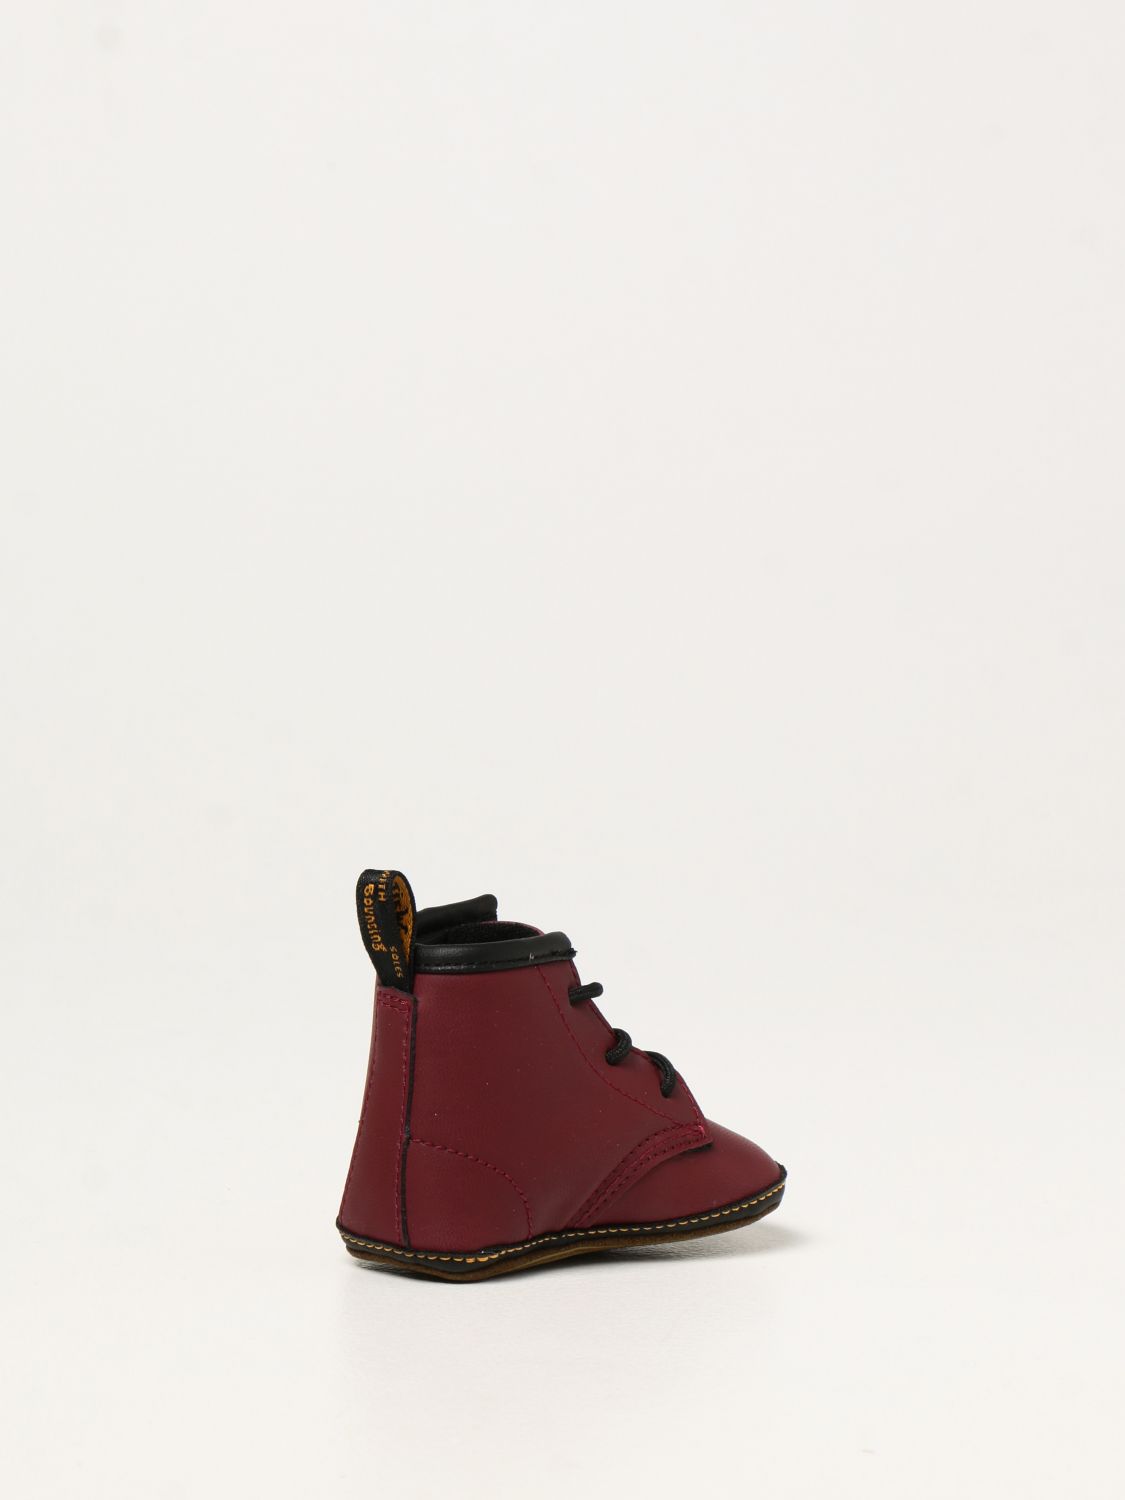 Shoes Dr. Martens: Dr. Martens 1460 shoe in rubberized leather burgundy 3